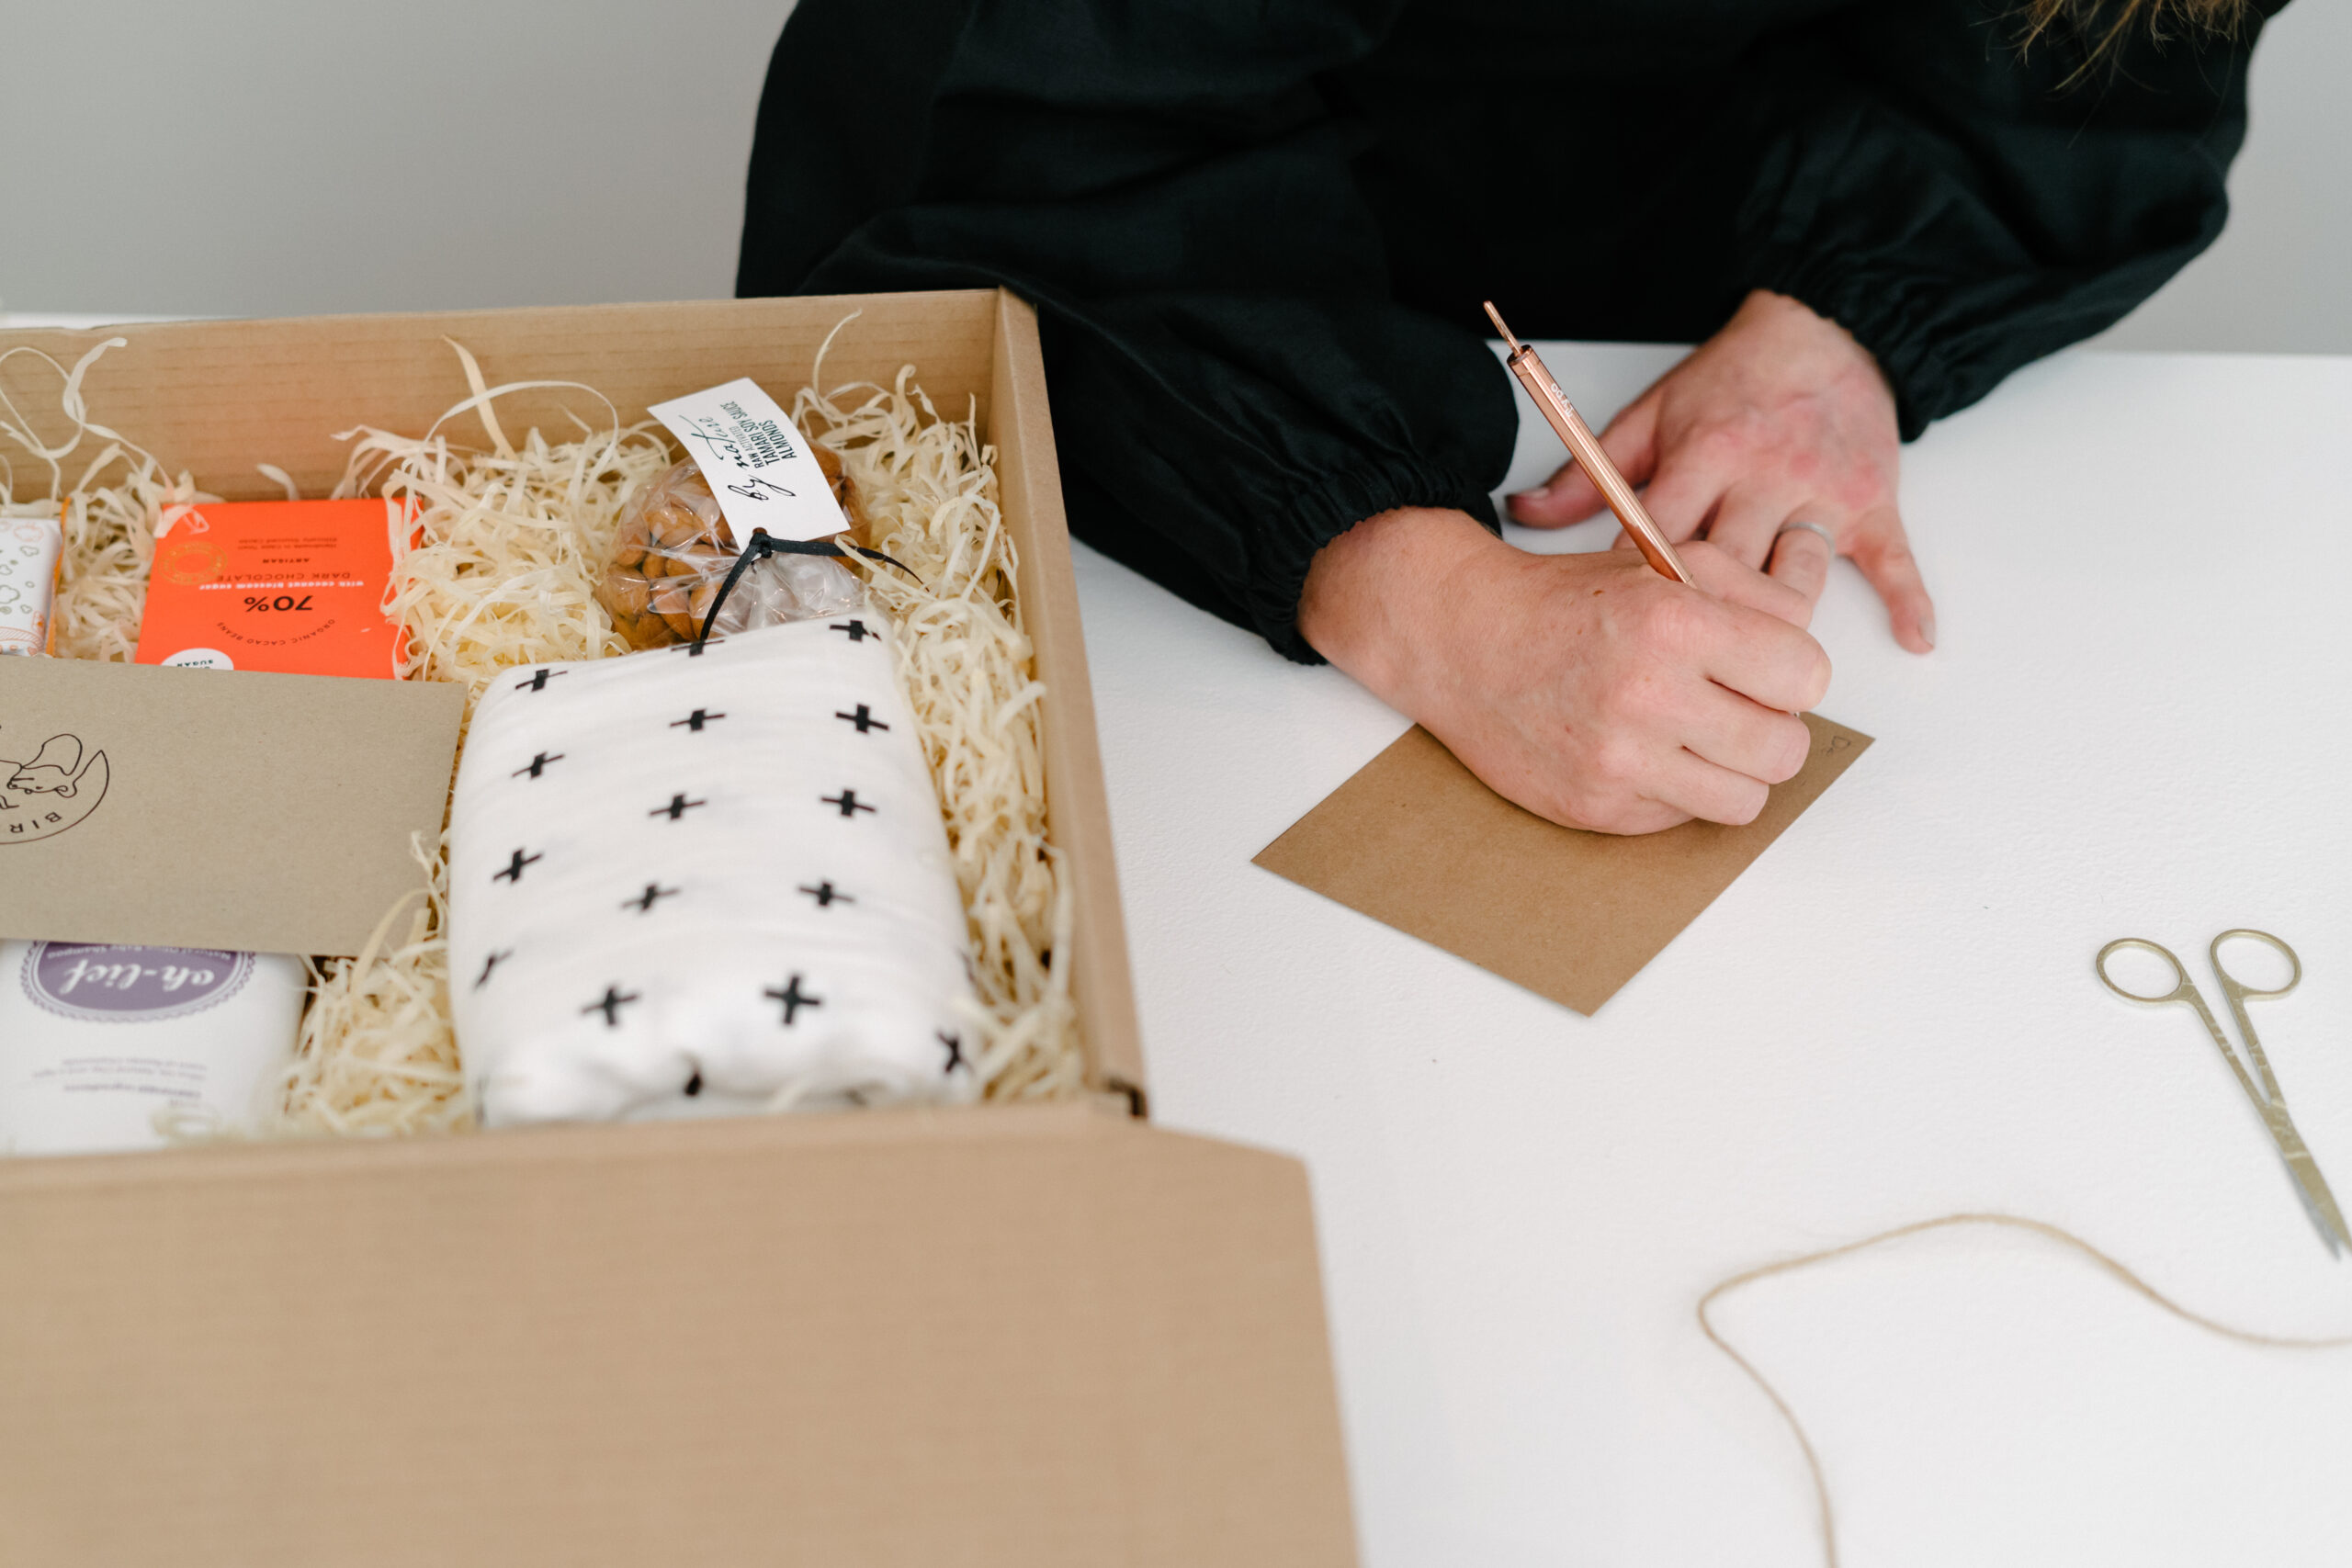 A shot of a packed gift box containing an assortment of items including a black and white muslin blanket, a slab of chocolate, a bag of nuts, a bottle of baby wash. A person can be seen writing a note on a brown card with a pair of scissors and some packing material on the table nearby